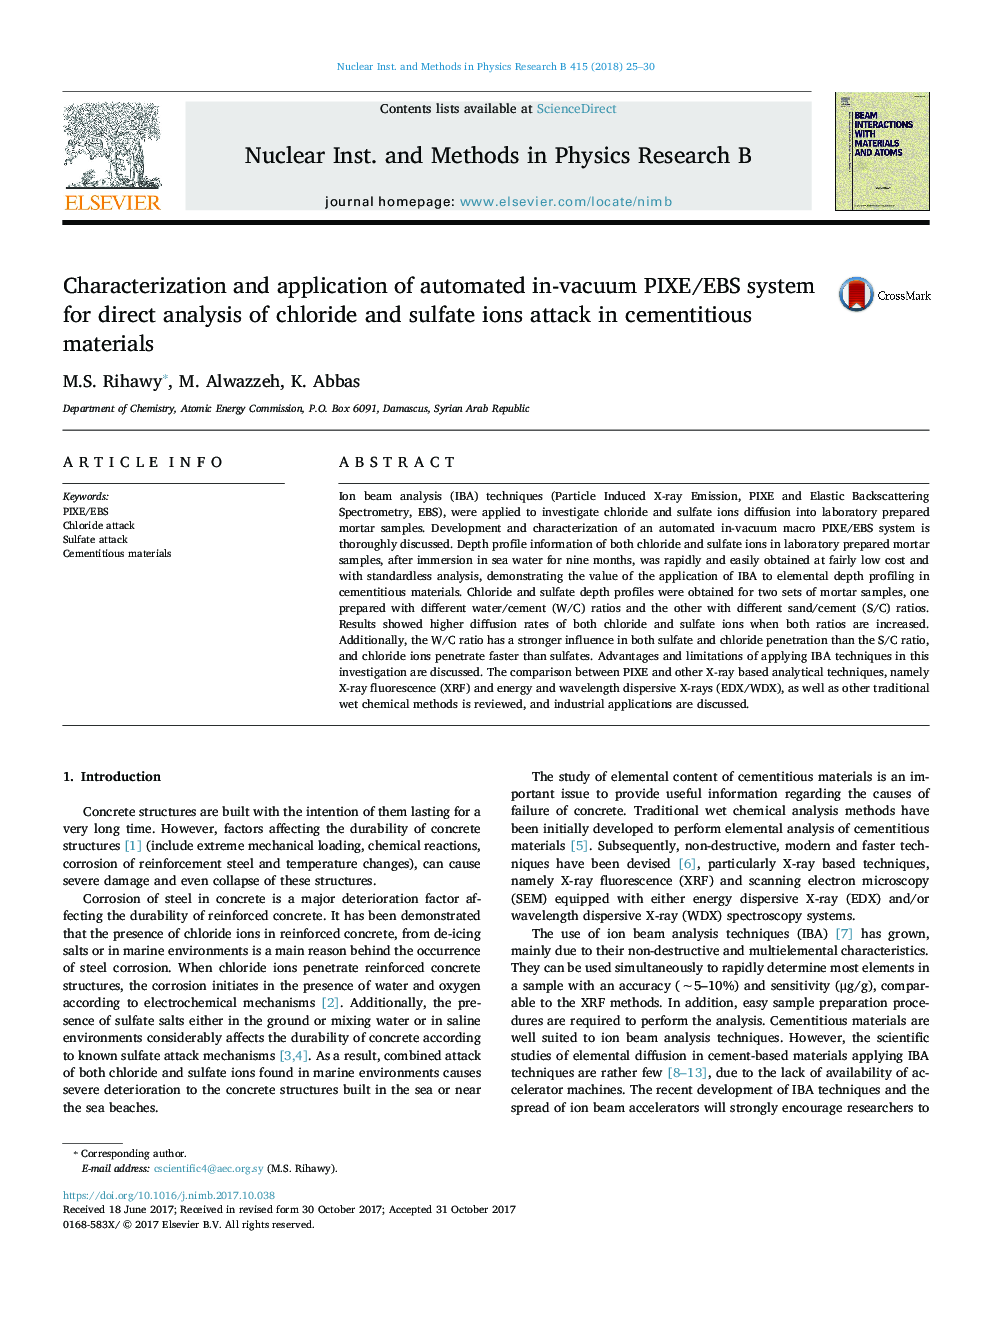 Characterization and application of automated in-vacuum PIXE/EBS system for direct analysis of chloride and sulfate ions attack in cementitious materials